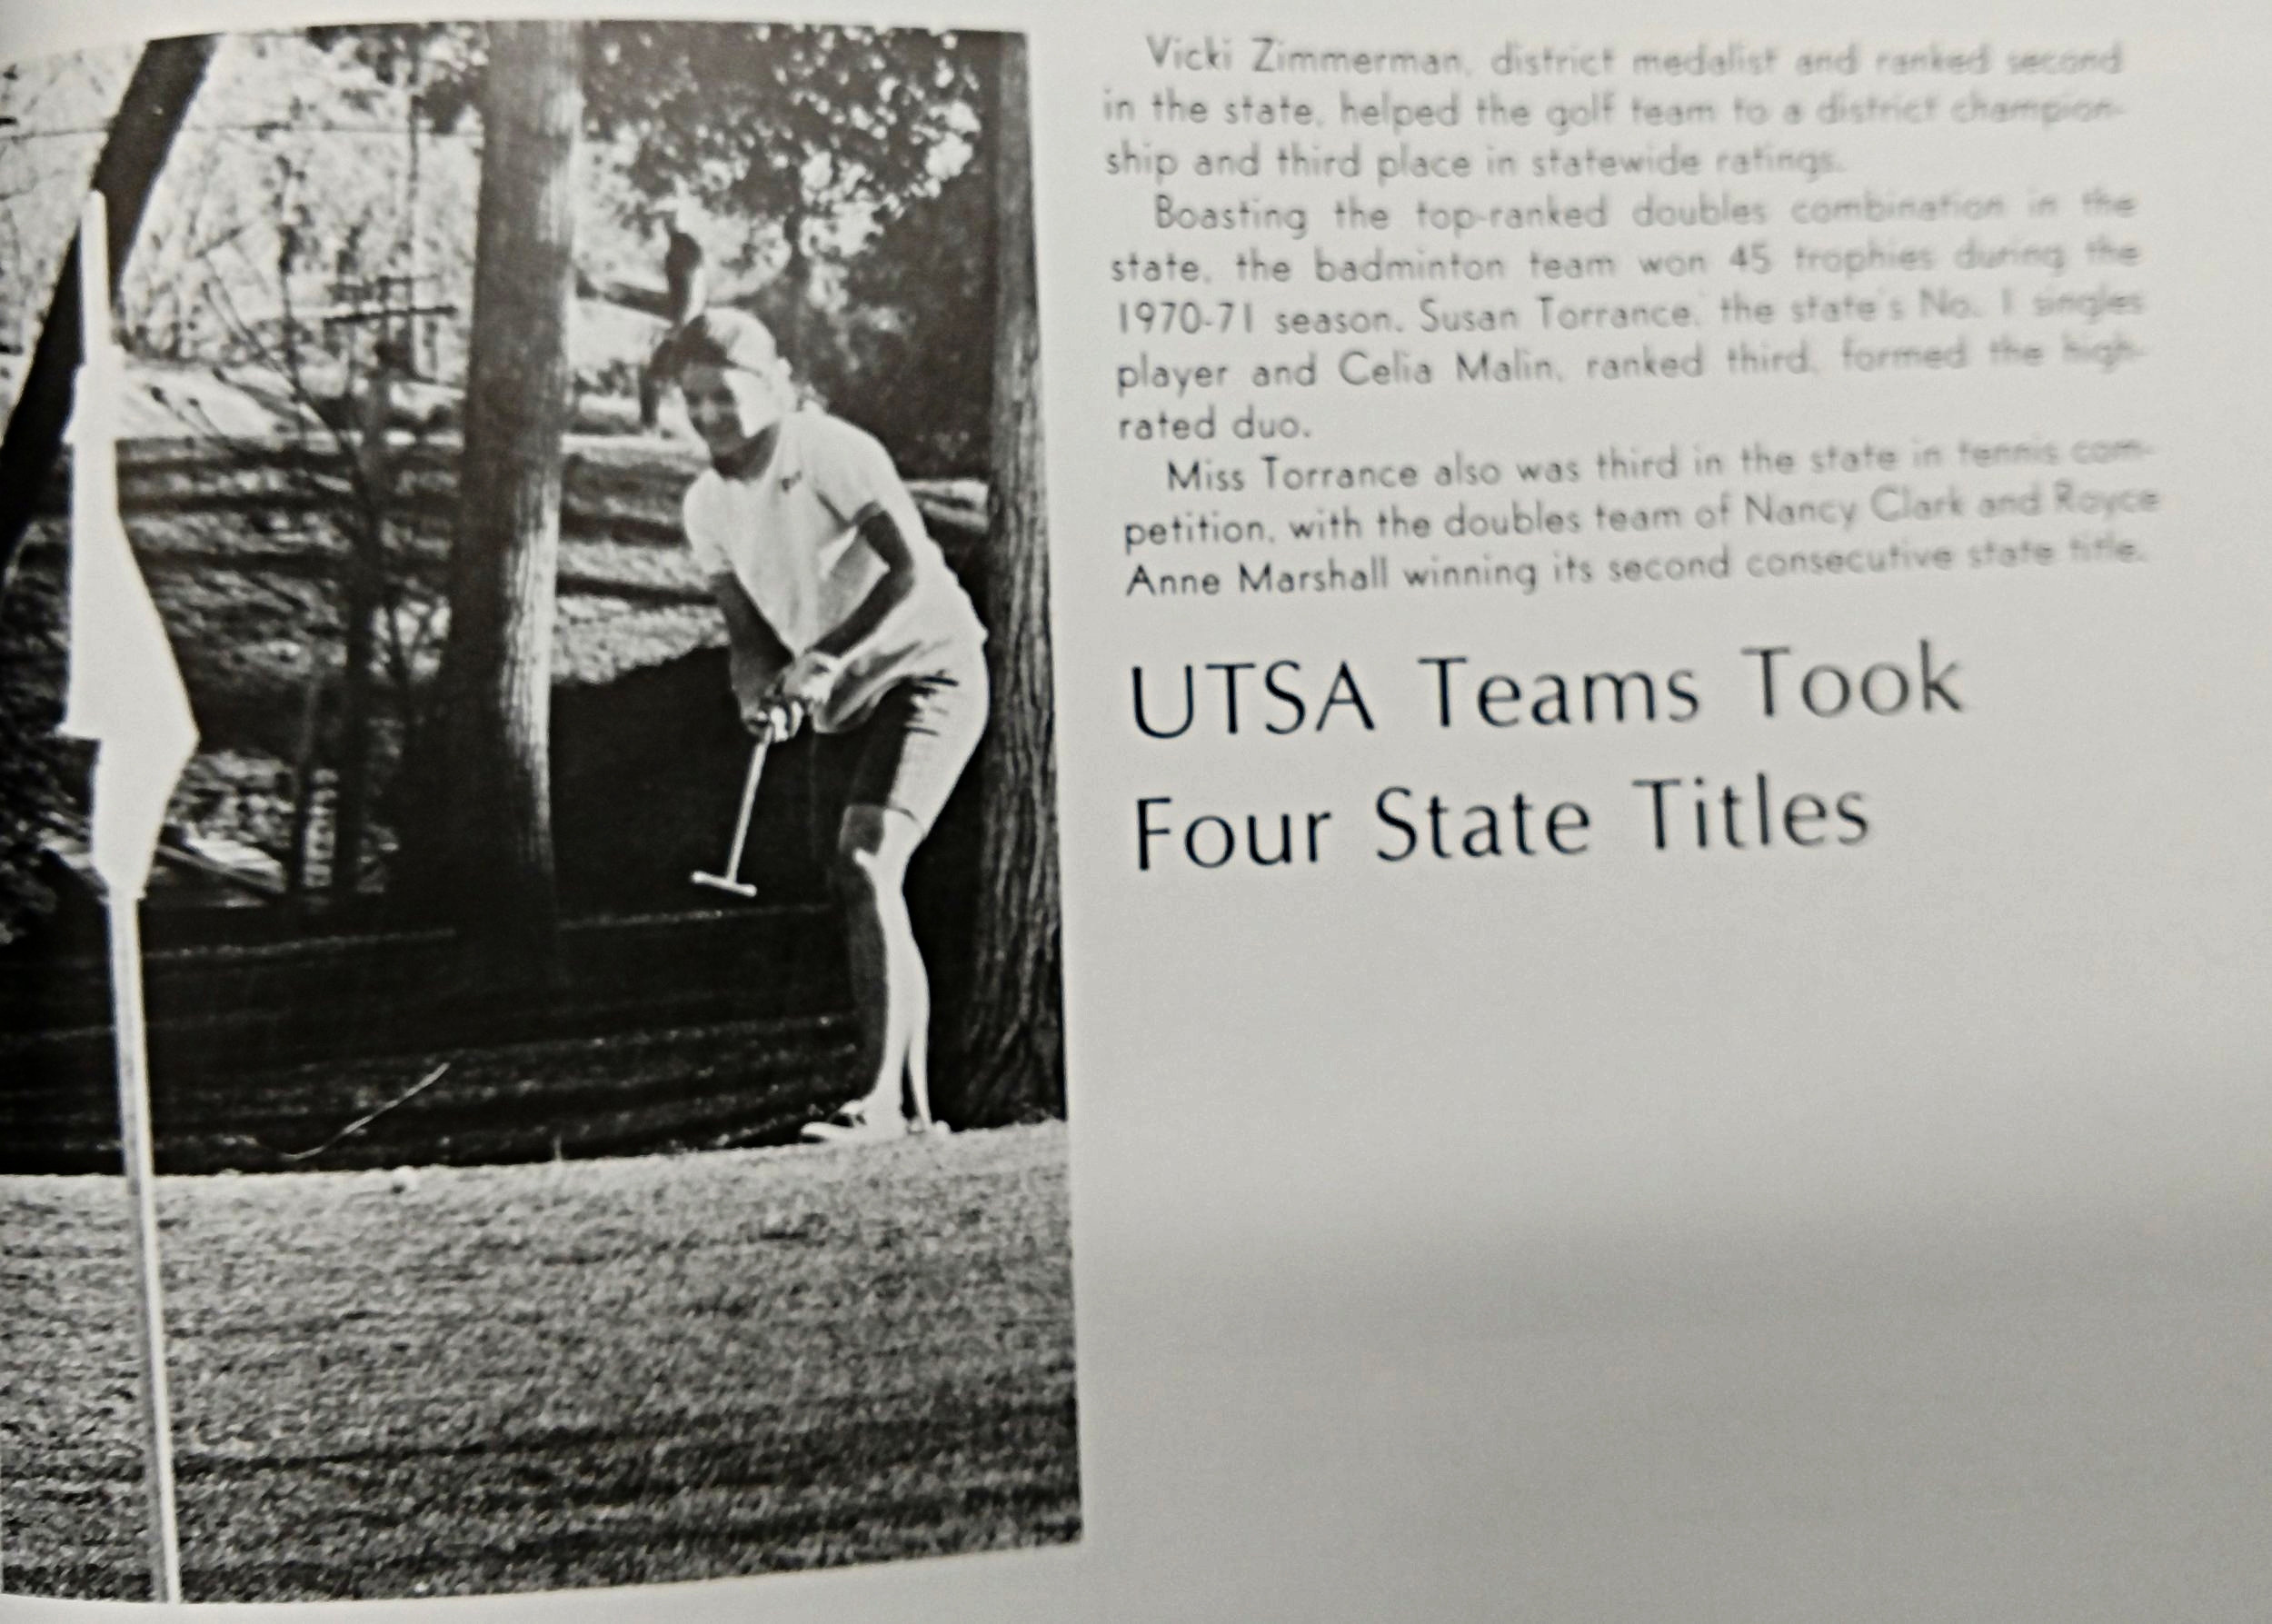 1971 Vicki Zimmerman is District medalist and ranked 2nd in the state